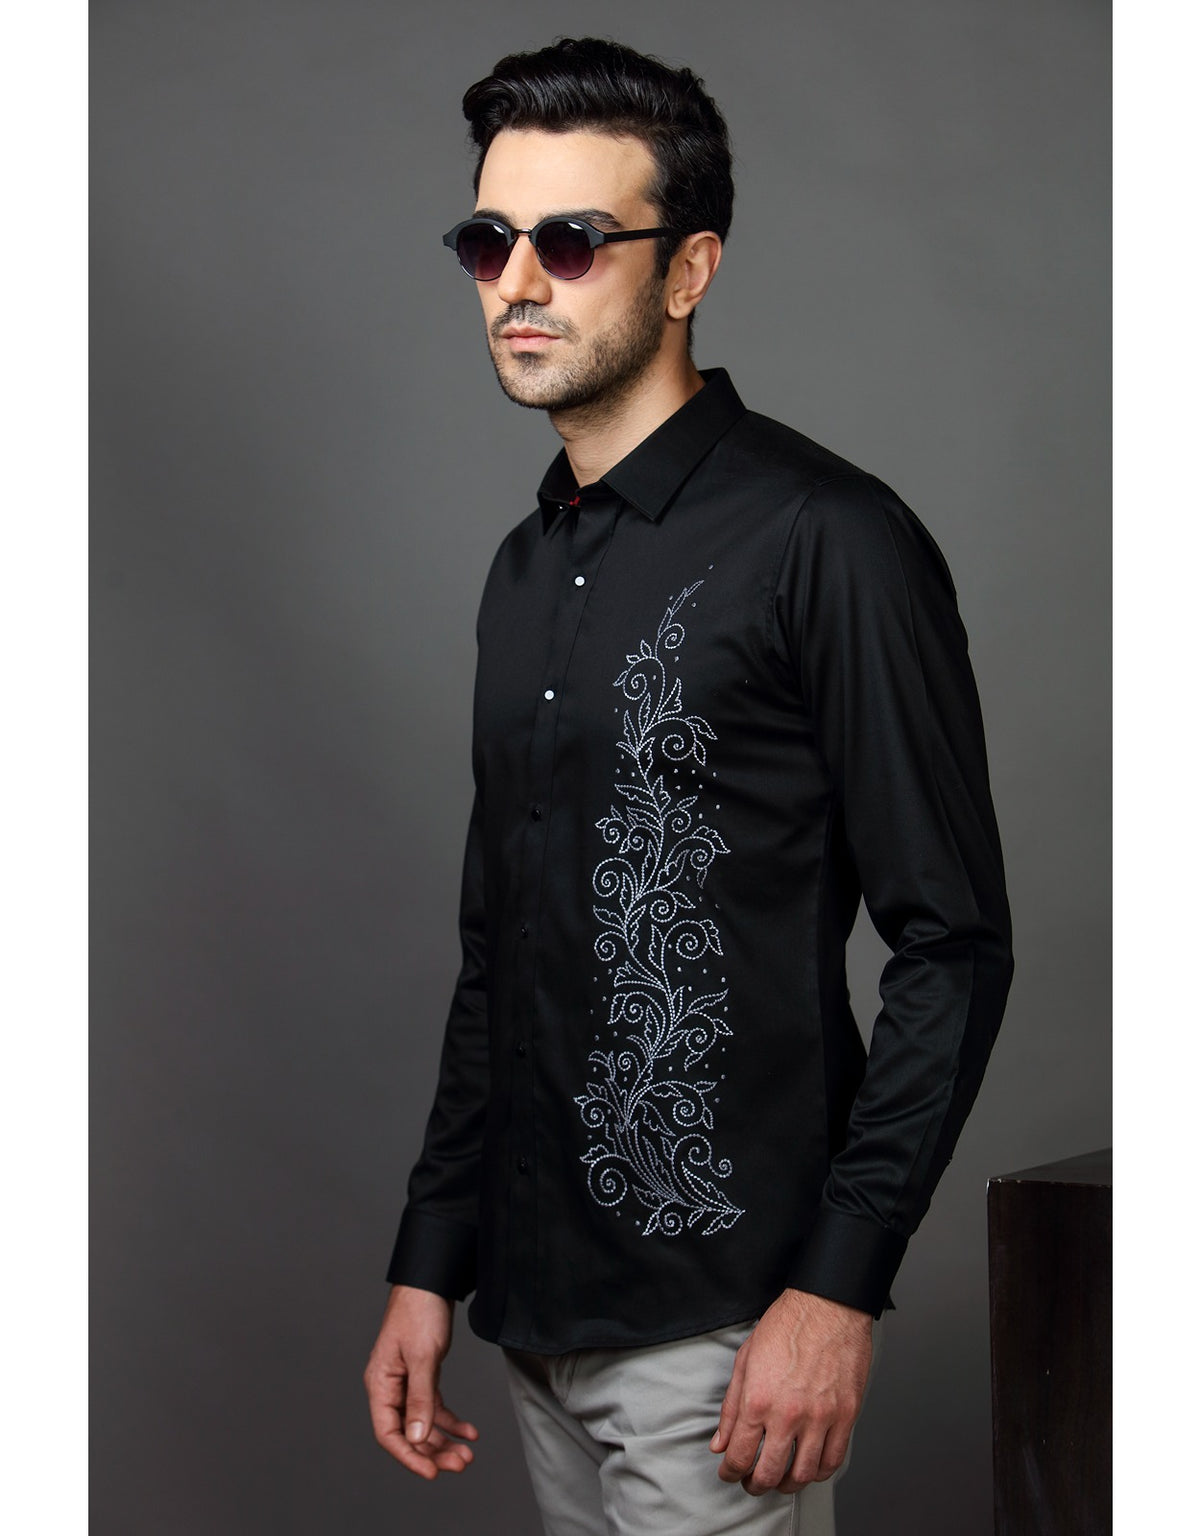 ABSTRACT FLORAL EMBROIDERY SHIRT